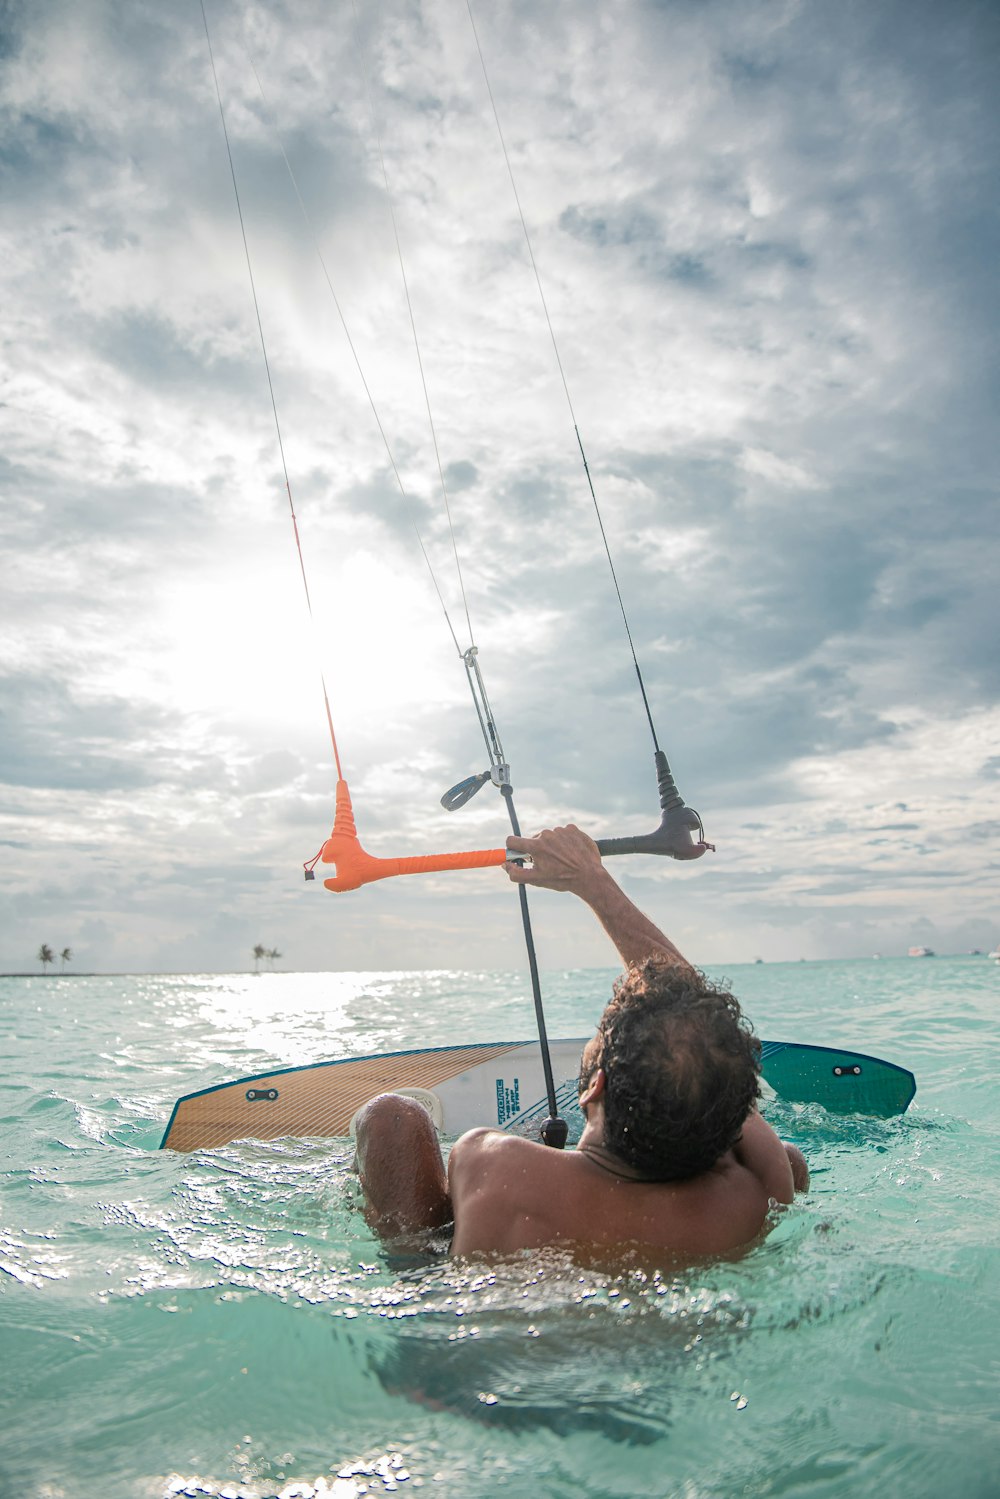 a man is in the water with a surfboard and a kite